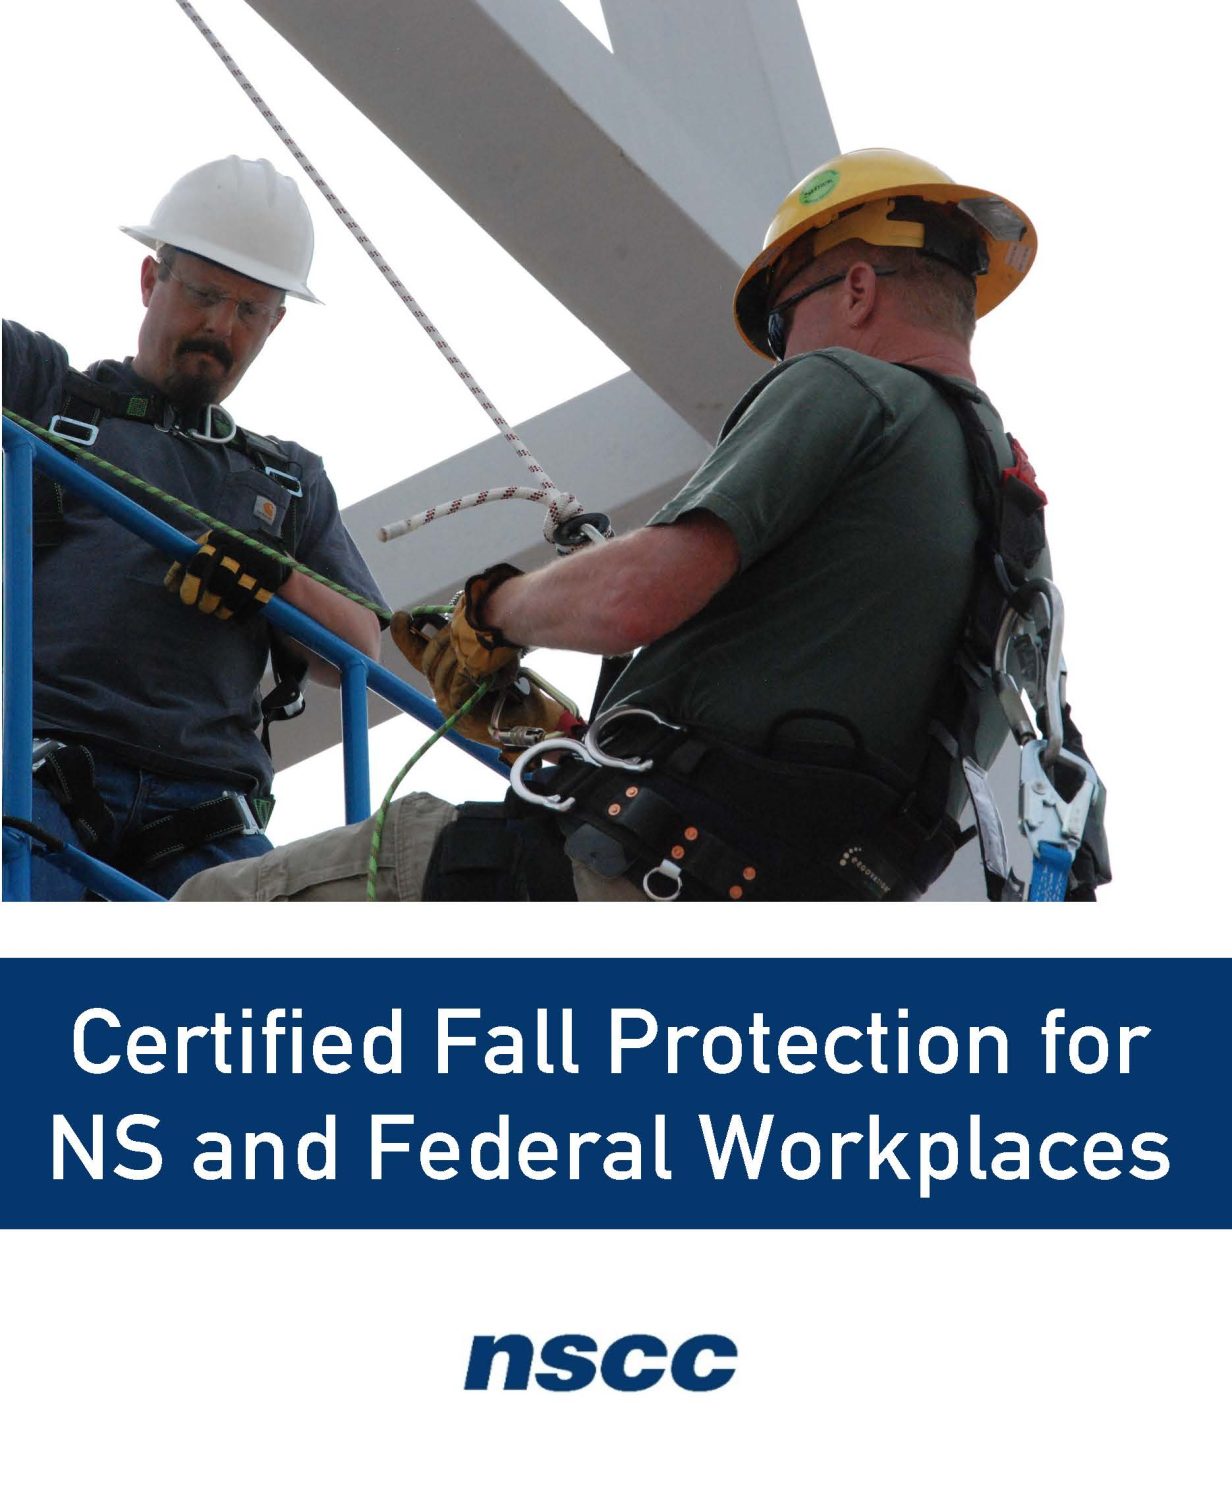 Cover image for NSCC Certified Fall Protection for NS and Federal Workplaces